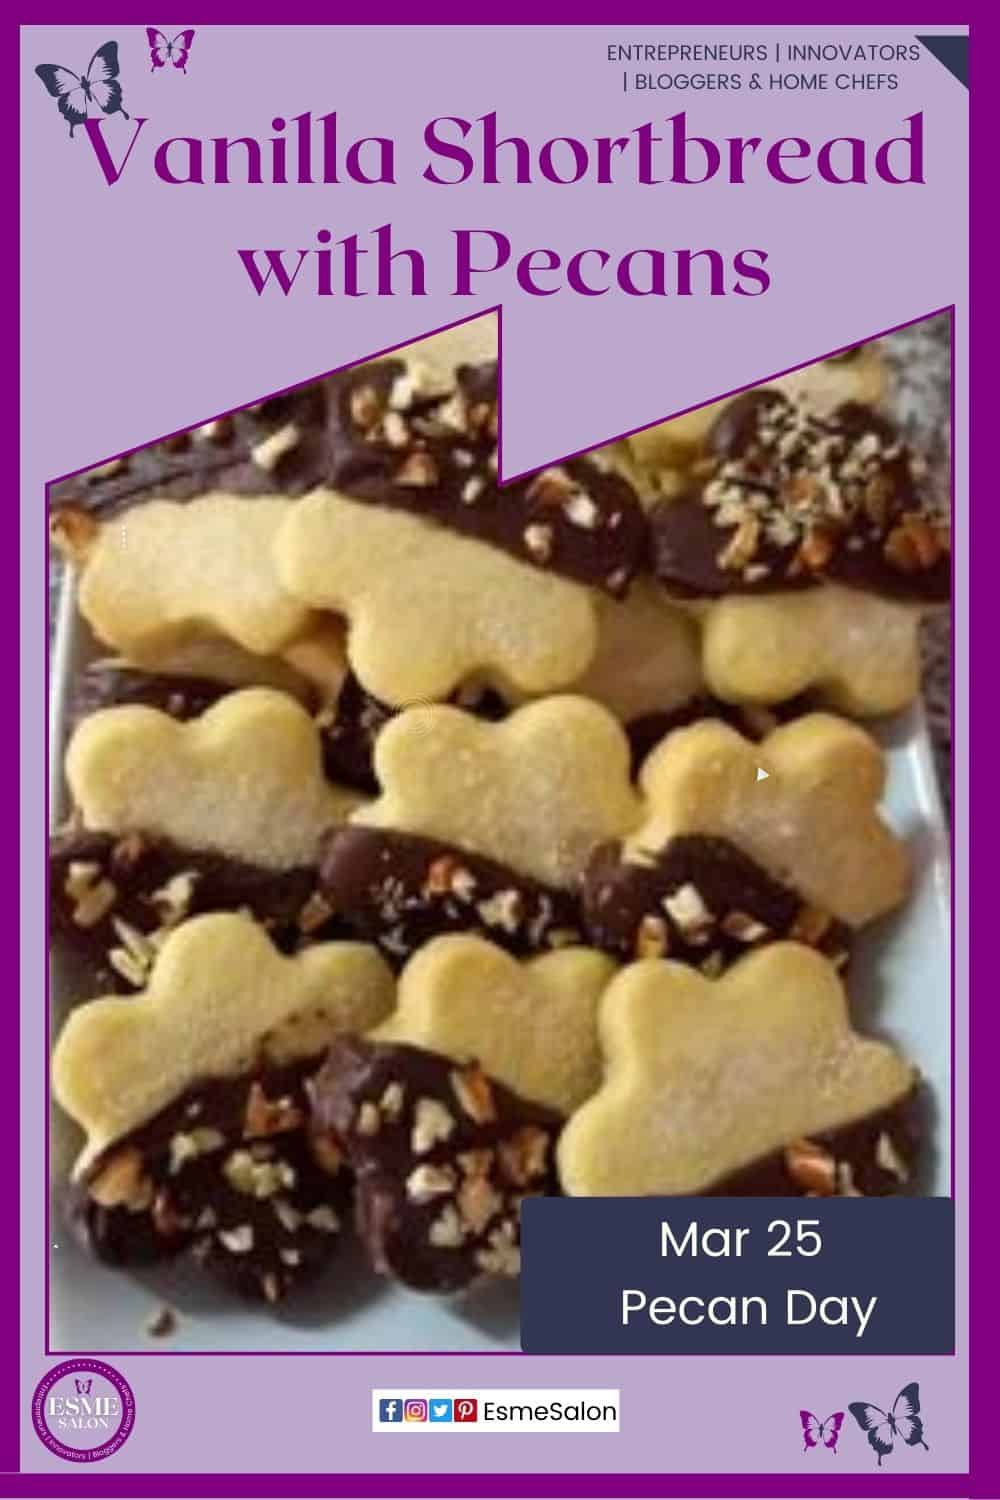 an image of shortbread biscuits, melted Cadburys chocolate, dipped half in chocolate, sprinkled with pecans